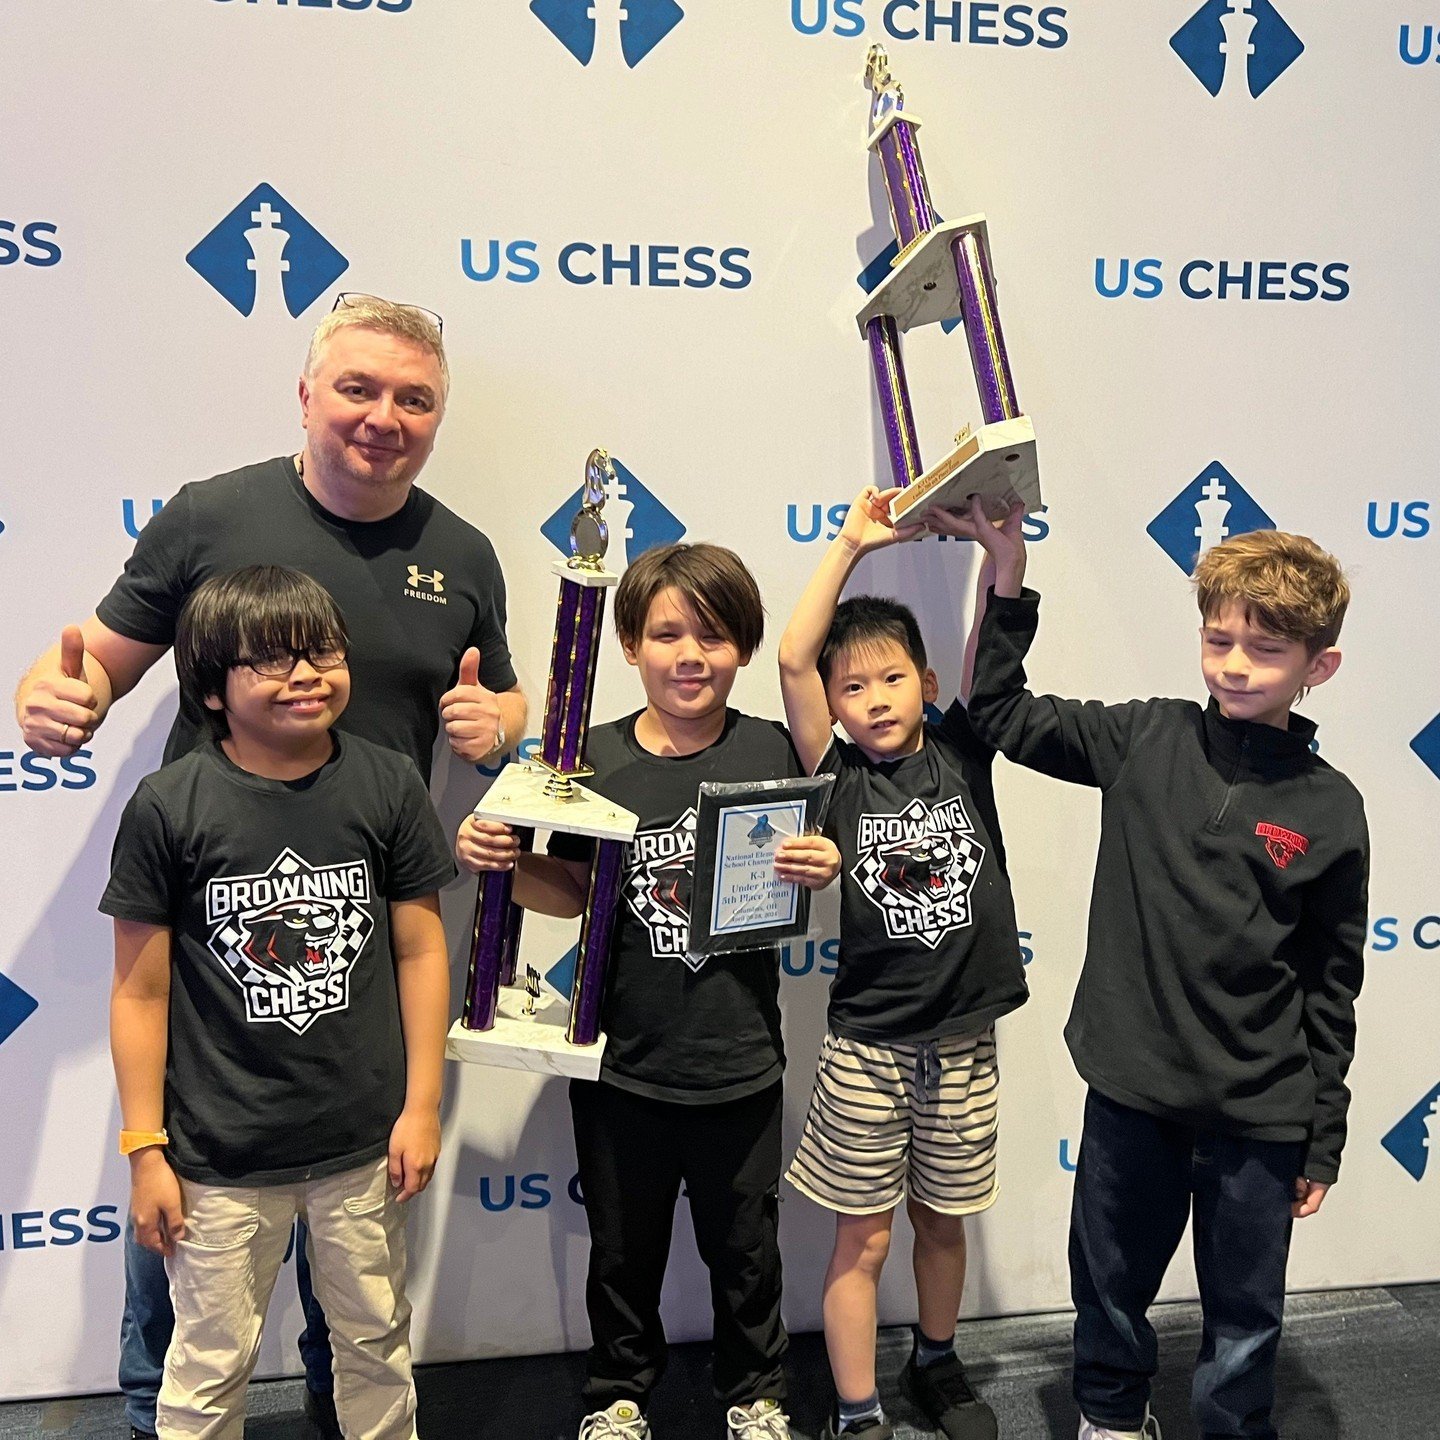 Our Chess Panthers roared at the K-6 National Championship in Baltimore, Ohio! With 15 Browning boys amongst over 1700 players, our three teams each brought home team trophies! ⁠
⁠
Highlights:⁠
🔹 K-3 U700: Oscar '34, Ethan '33 Jude '33, Ujaan '33 to